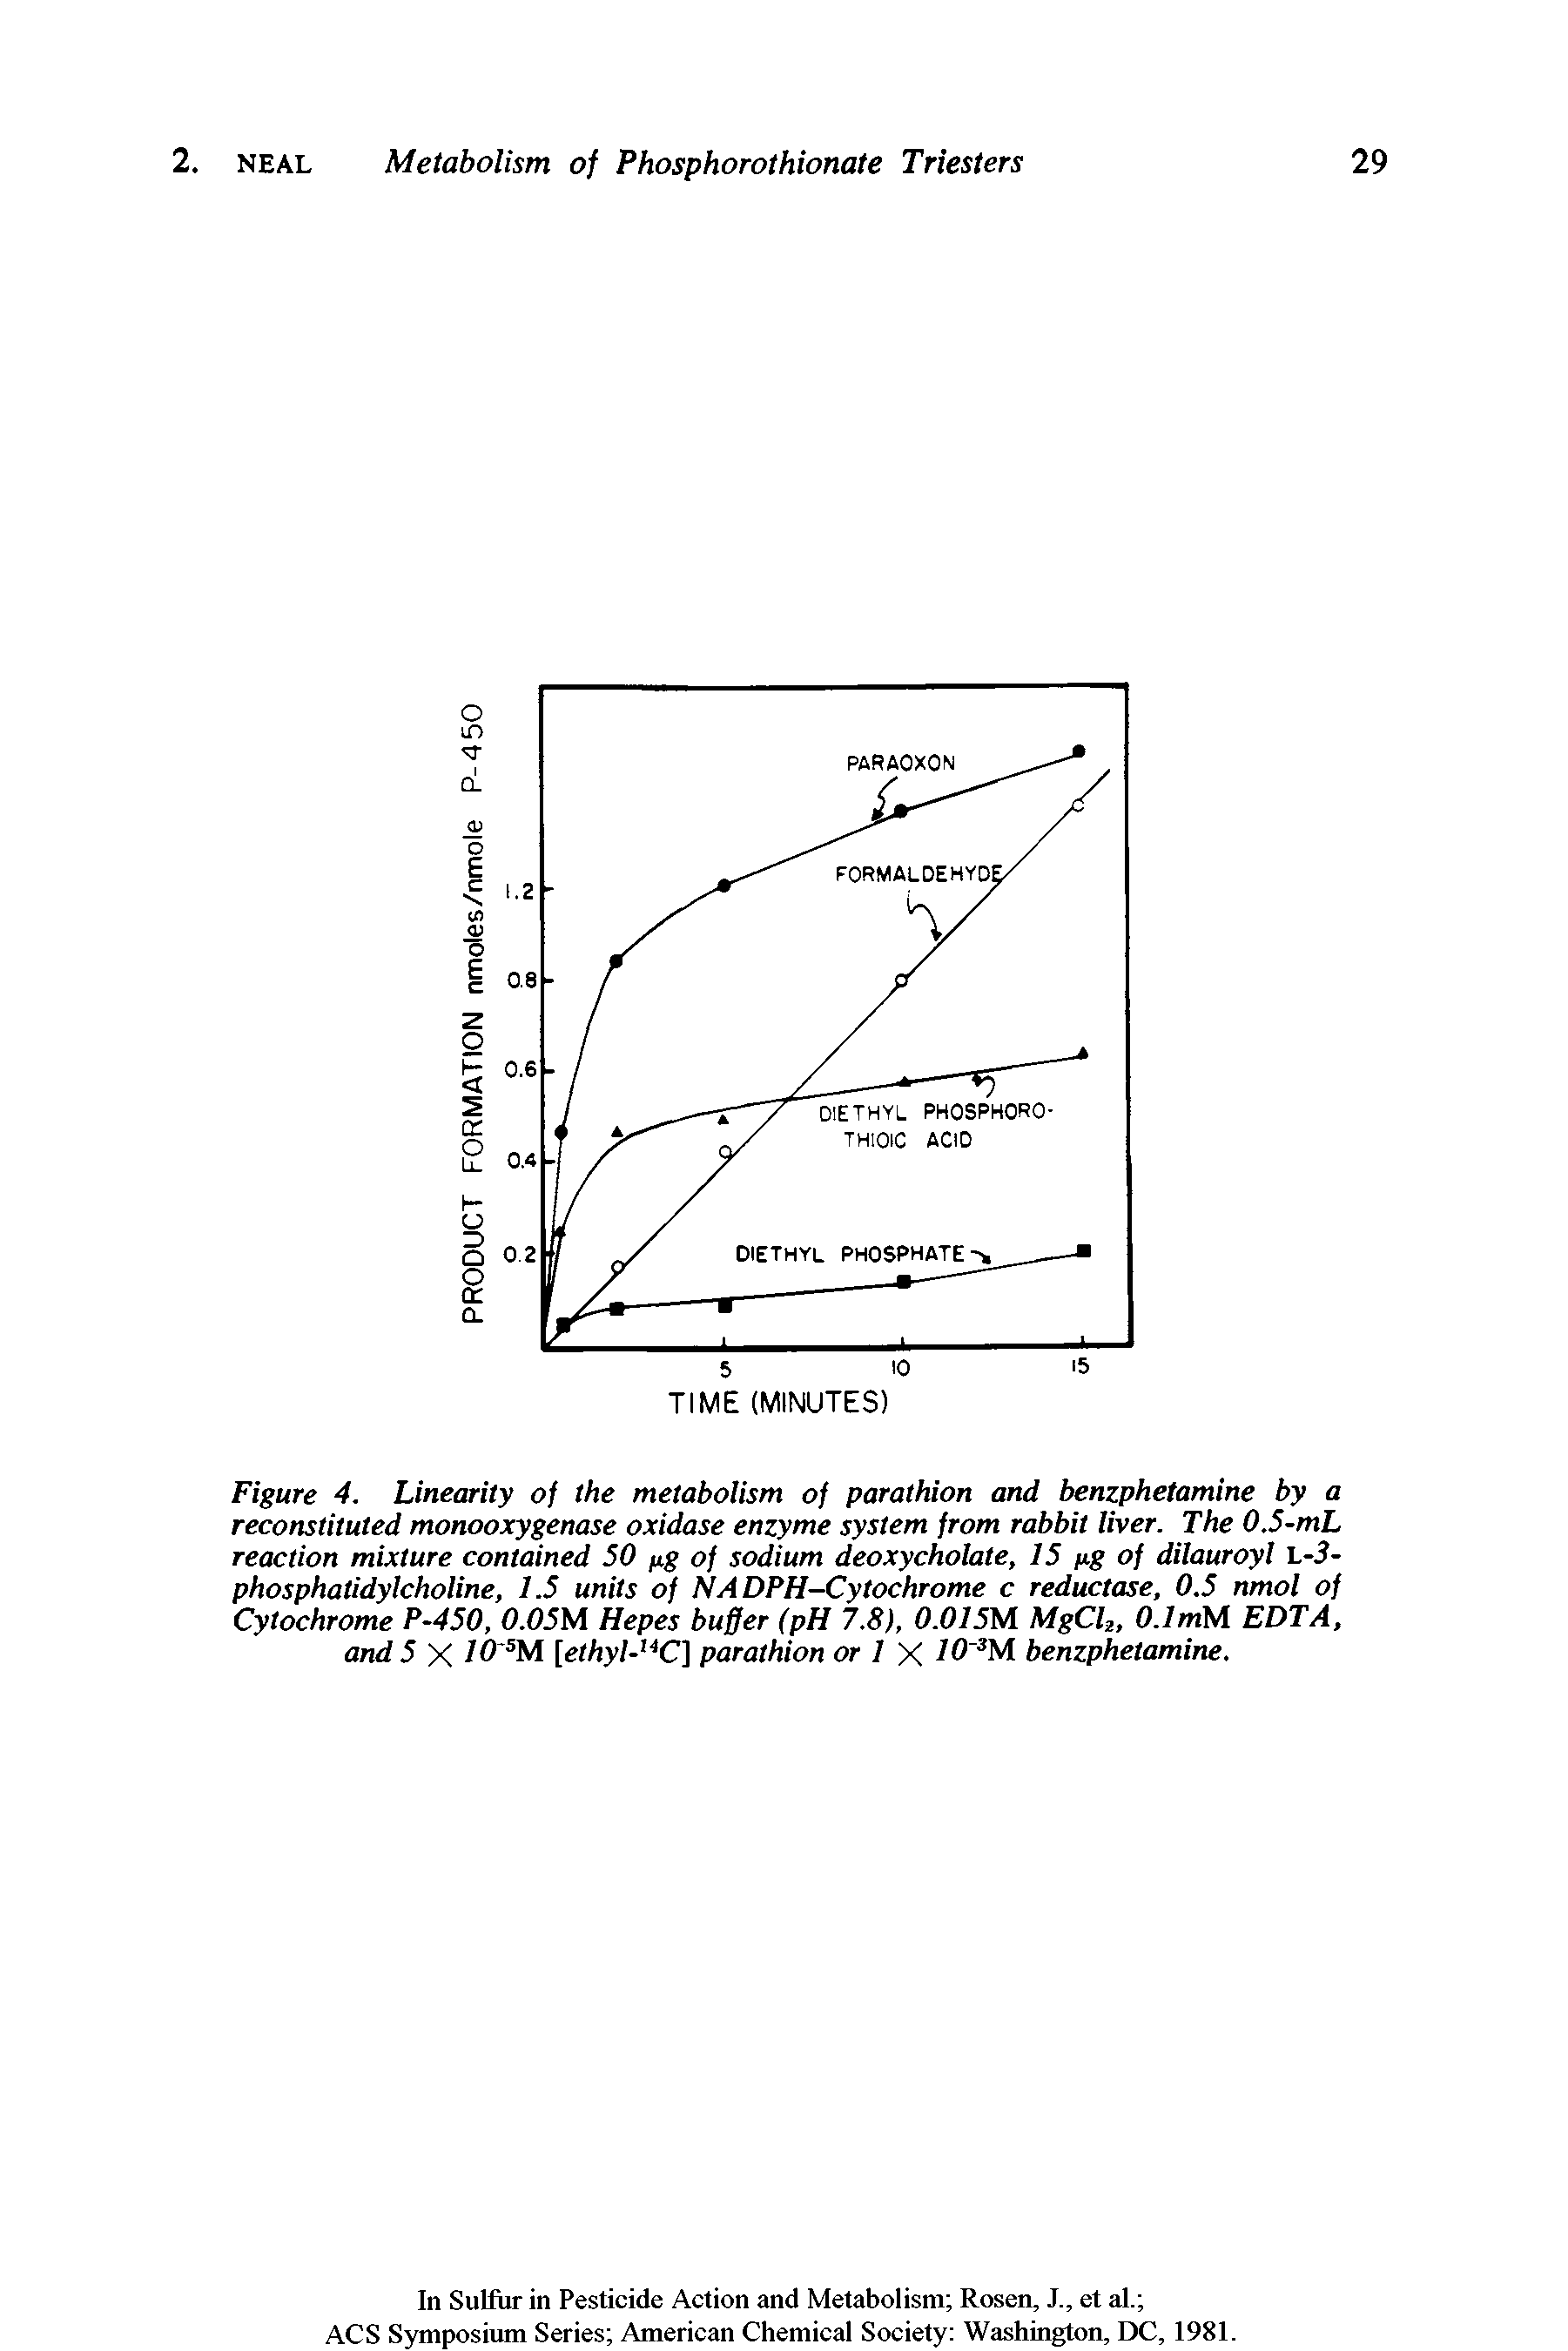 Figure 4. Linearity of the metabolism of parathion and benzphetamine by a reconstituted monooxygenase oxidase enzyme system from rabbit liver. The 0.5-mL reaction mixture contained 50 fig of sodium deoxycholate, 15 iig of dilauroyl l-5-phosphatidylcholine, 1.5 units of NADPH-Cytochrome c reductase, 0.5 nmol of Cytochrome P-450, 0.05M Hepes buffer (pH 7.8), 0.015M MgCh, O.lmU EDTA, and 5 X lO M [ethyl- C] parathion or / X 10 M benzphetamine.